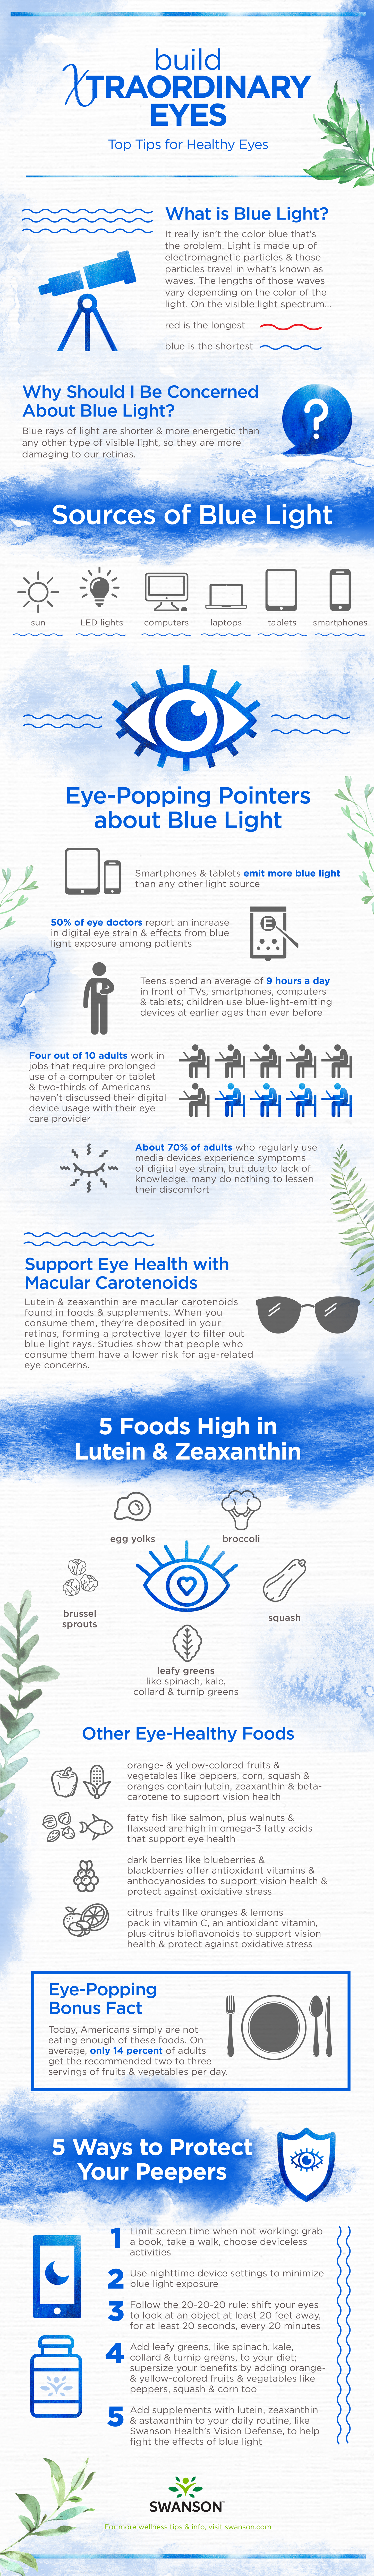 Build Extraordinary Eyes with Nutrition for Eye Health - infographic with blue light facts and eye health tips